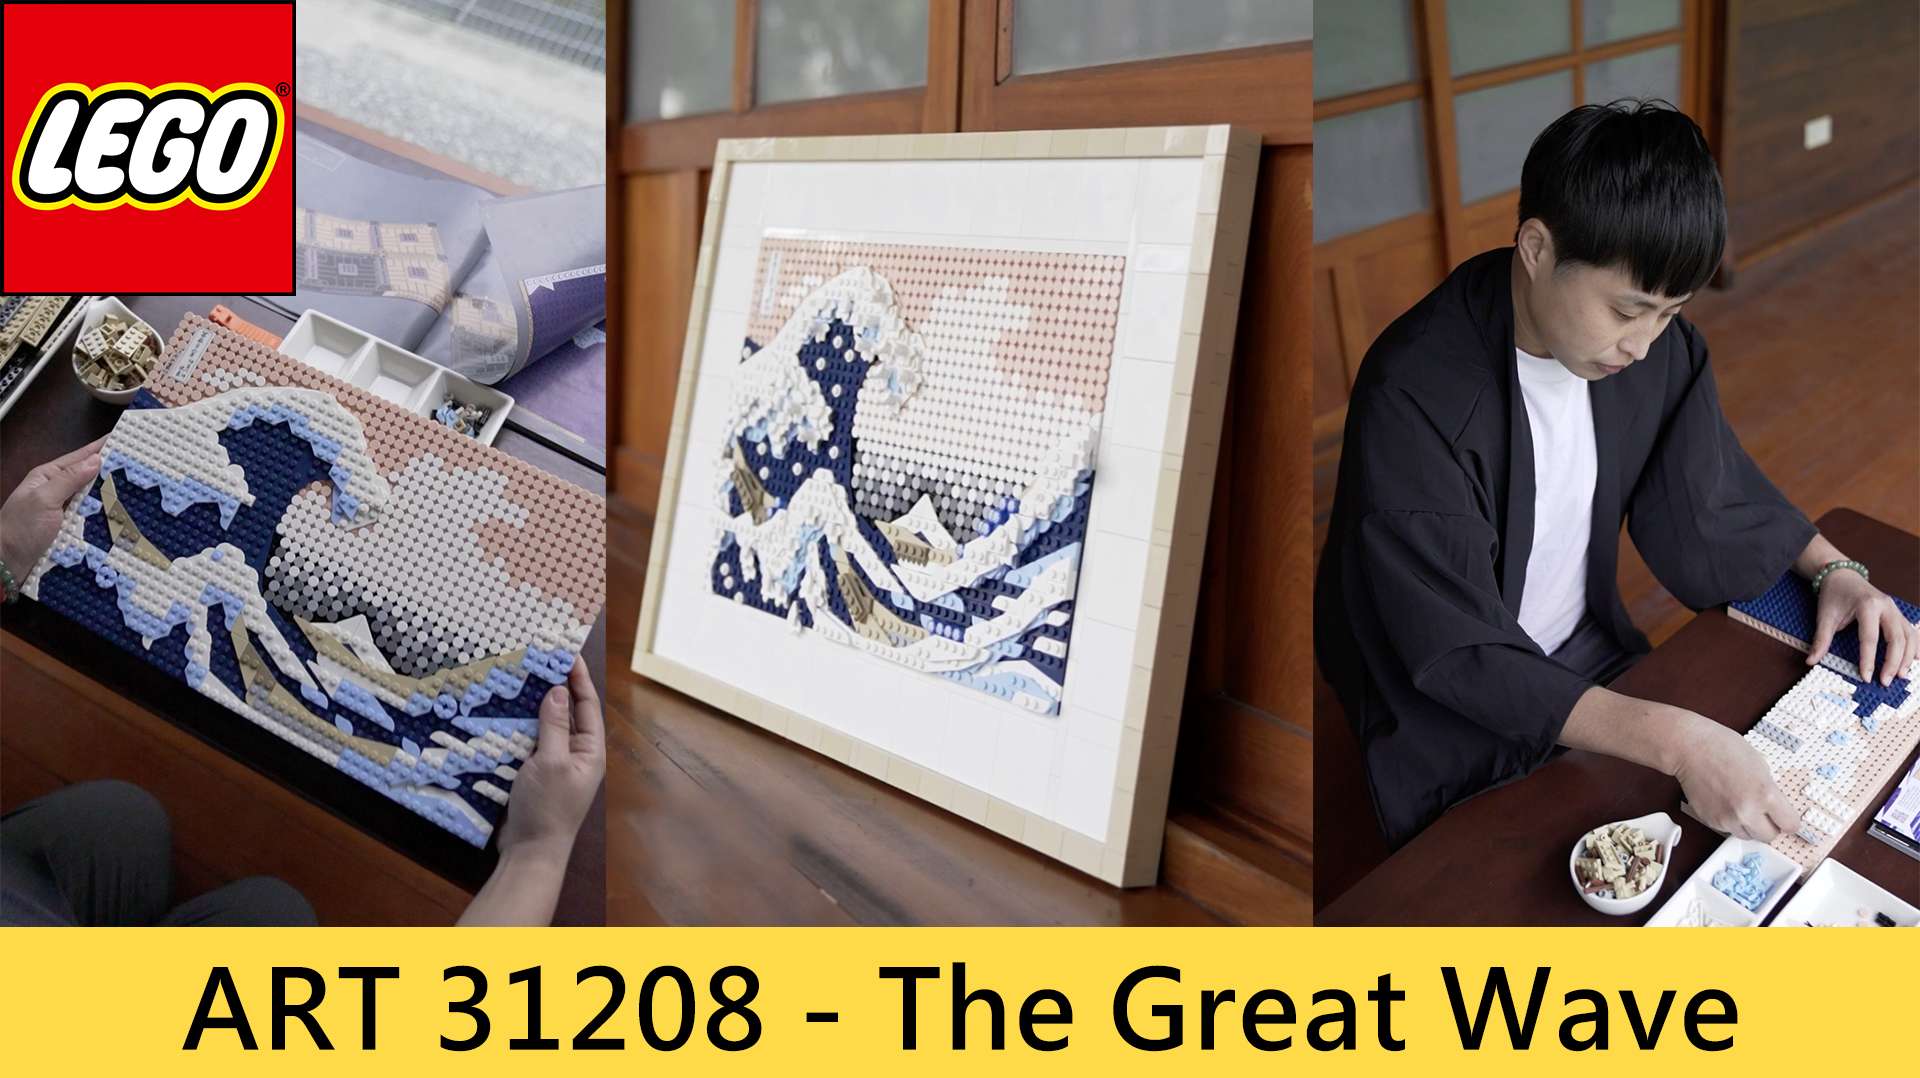 #LEGO/ART31208/The Great Wave